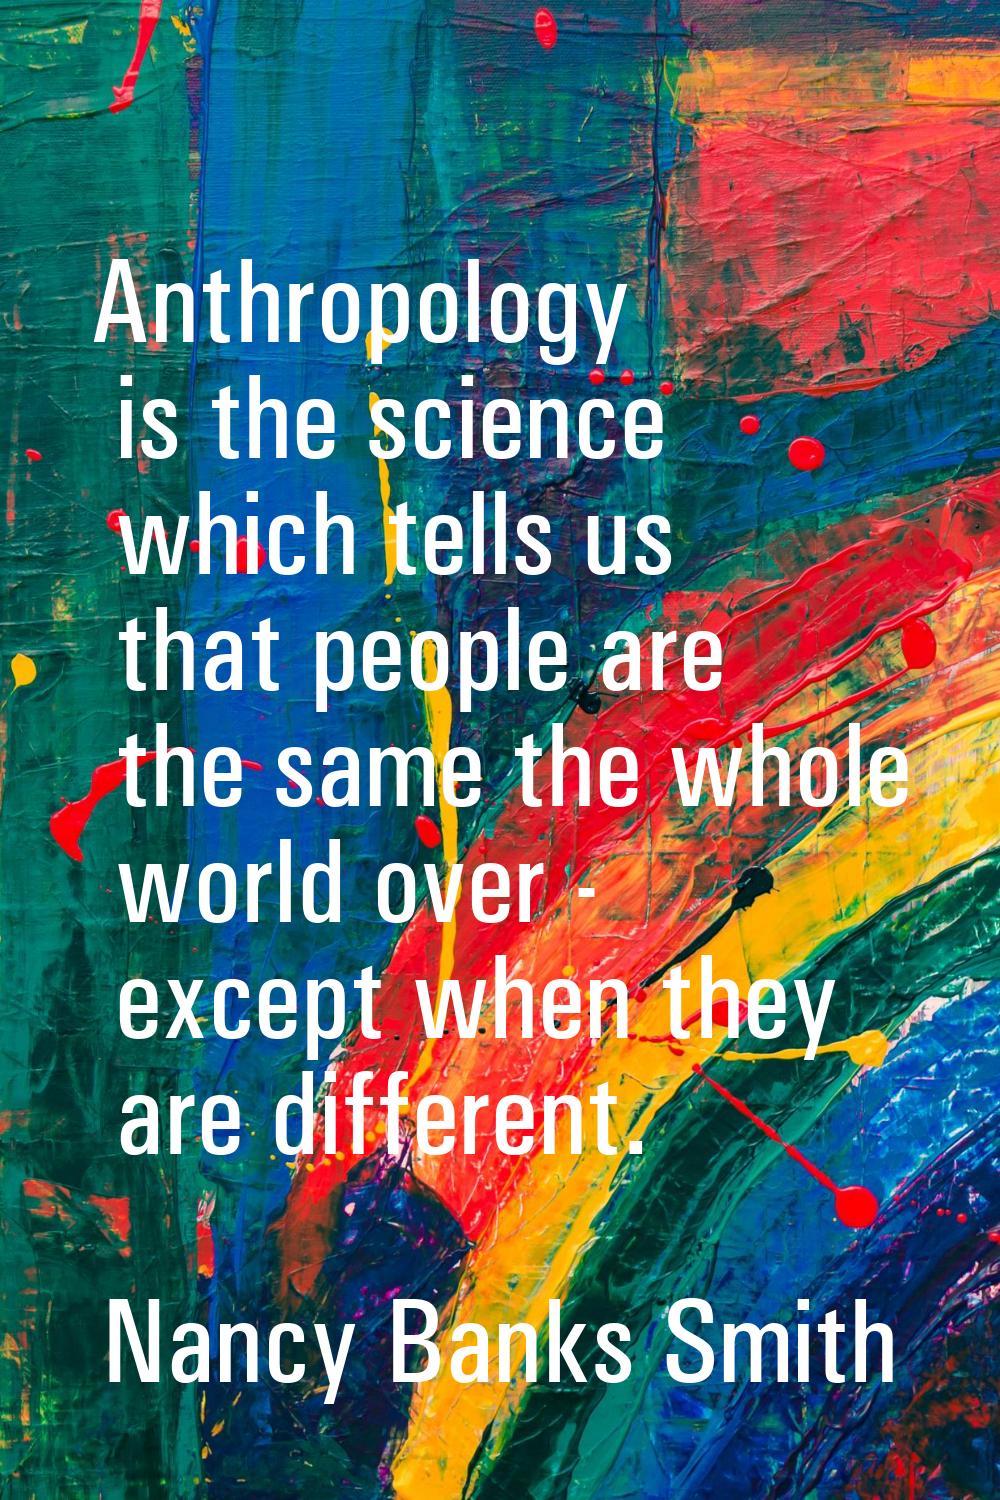 Anthropology is the science which tells us that people are the same the whole world over - except w